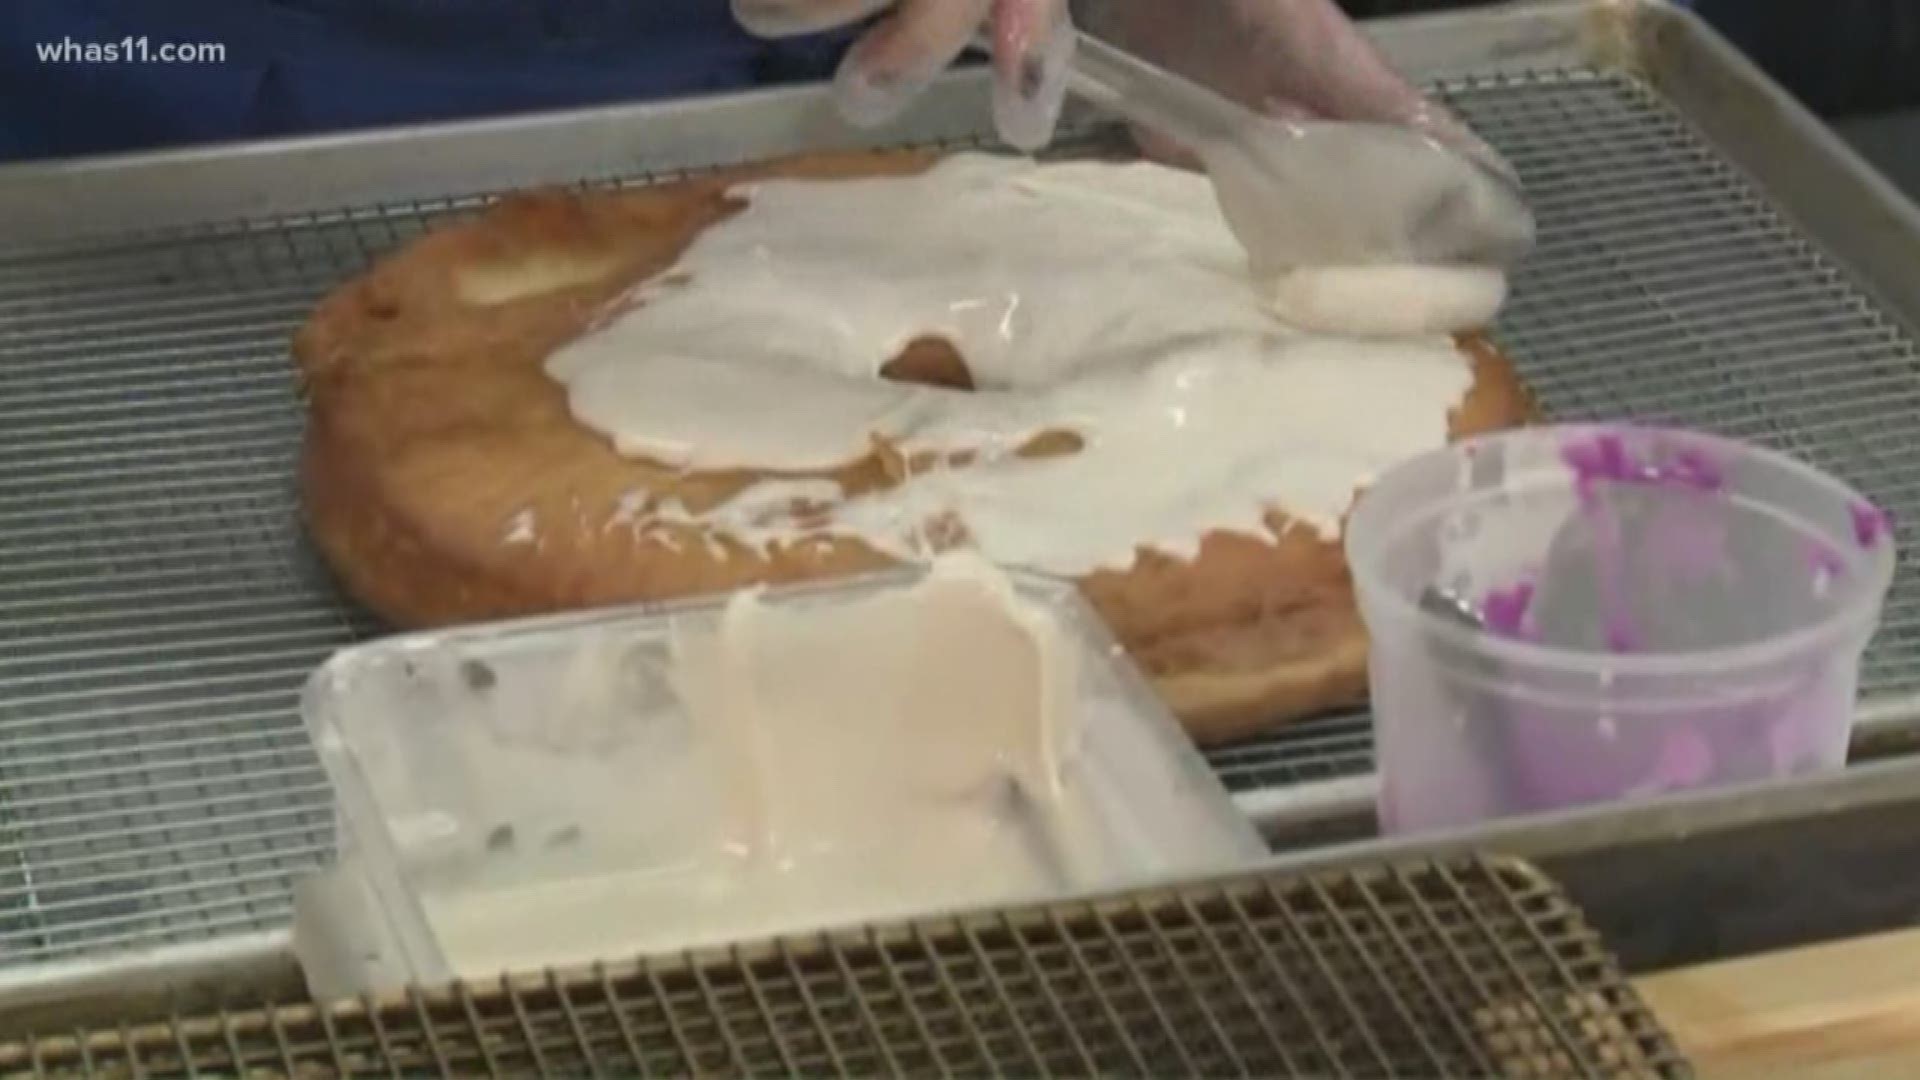 Rob Harris took a trip down to Hi-Five Doughnuts to see what goes into their famous King Cake doughnut.